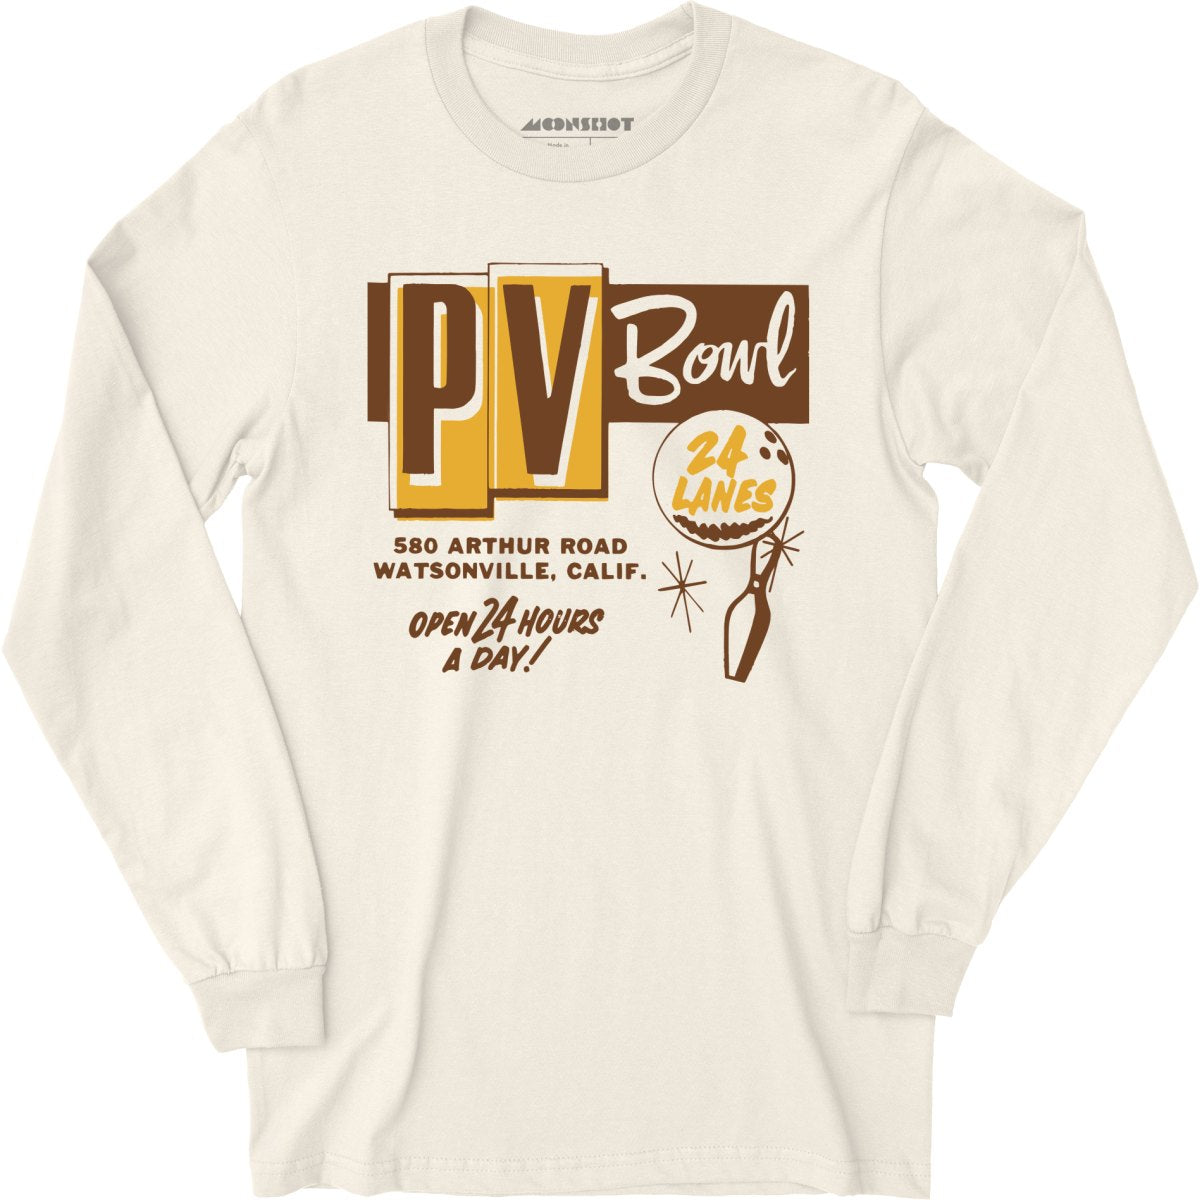 PV Bowl - Watsonville, CA - Vintage Bowling Alley - Long Sleeve T-Shirt